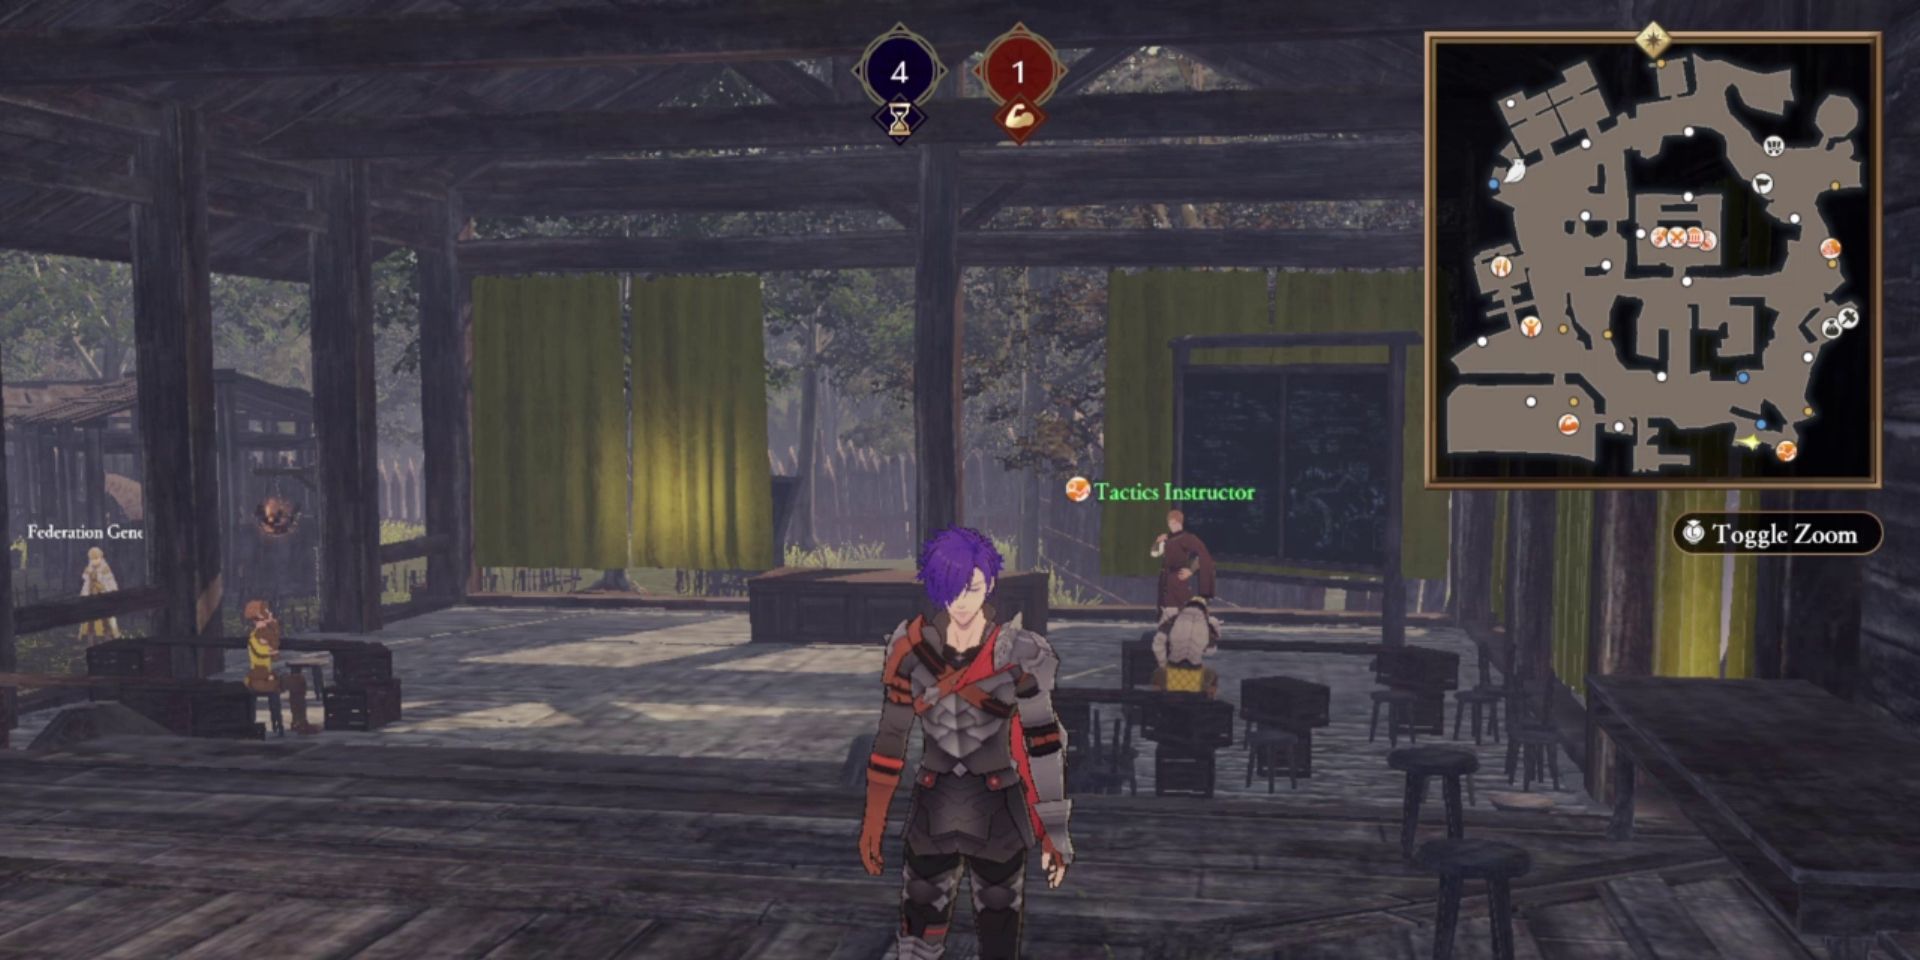 a purple haired man in plate male with red trim stands in a wooden structure with no walls. behind him is a makeshift classroom with yellow curtains. at the head of the class, in front of a blackboard, is a man with the title "tactics instructor" over his head in green font